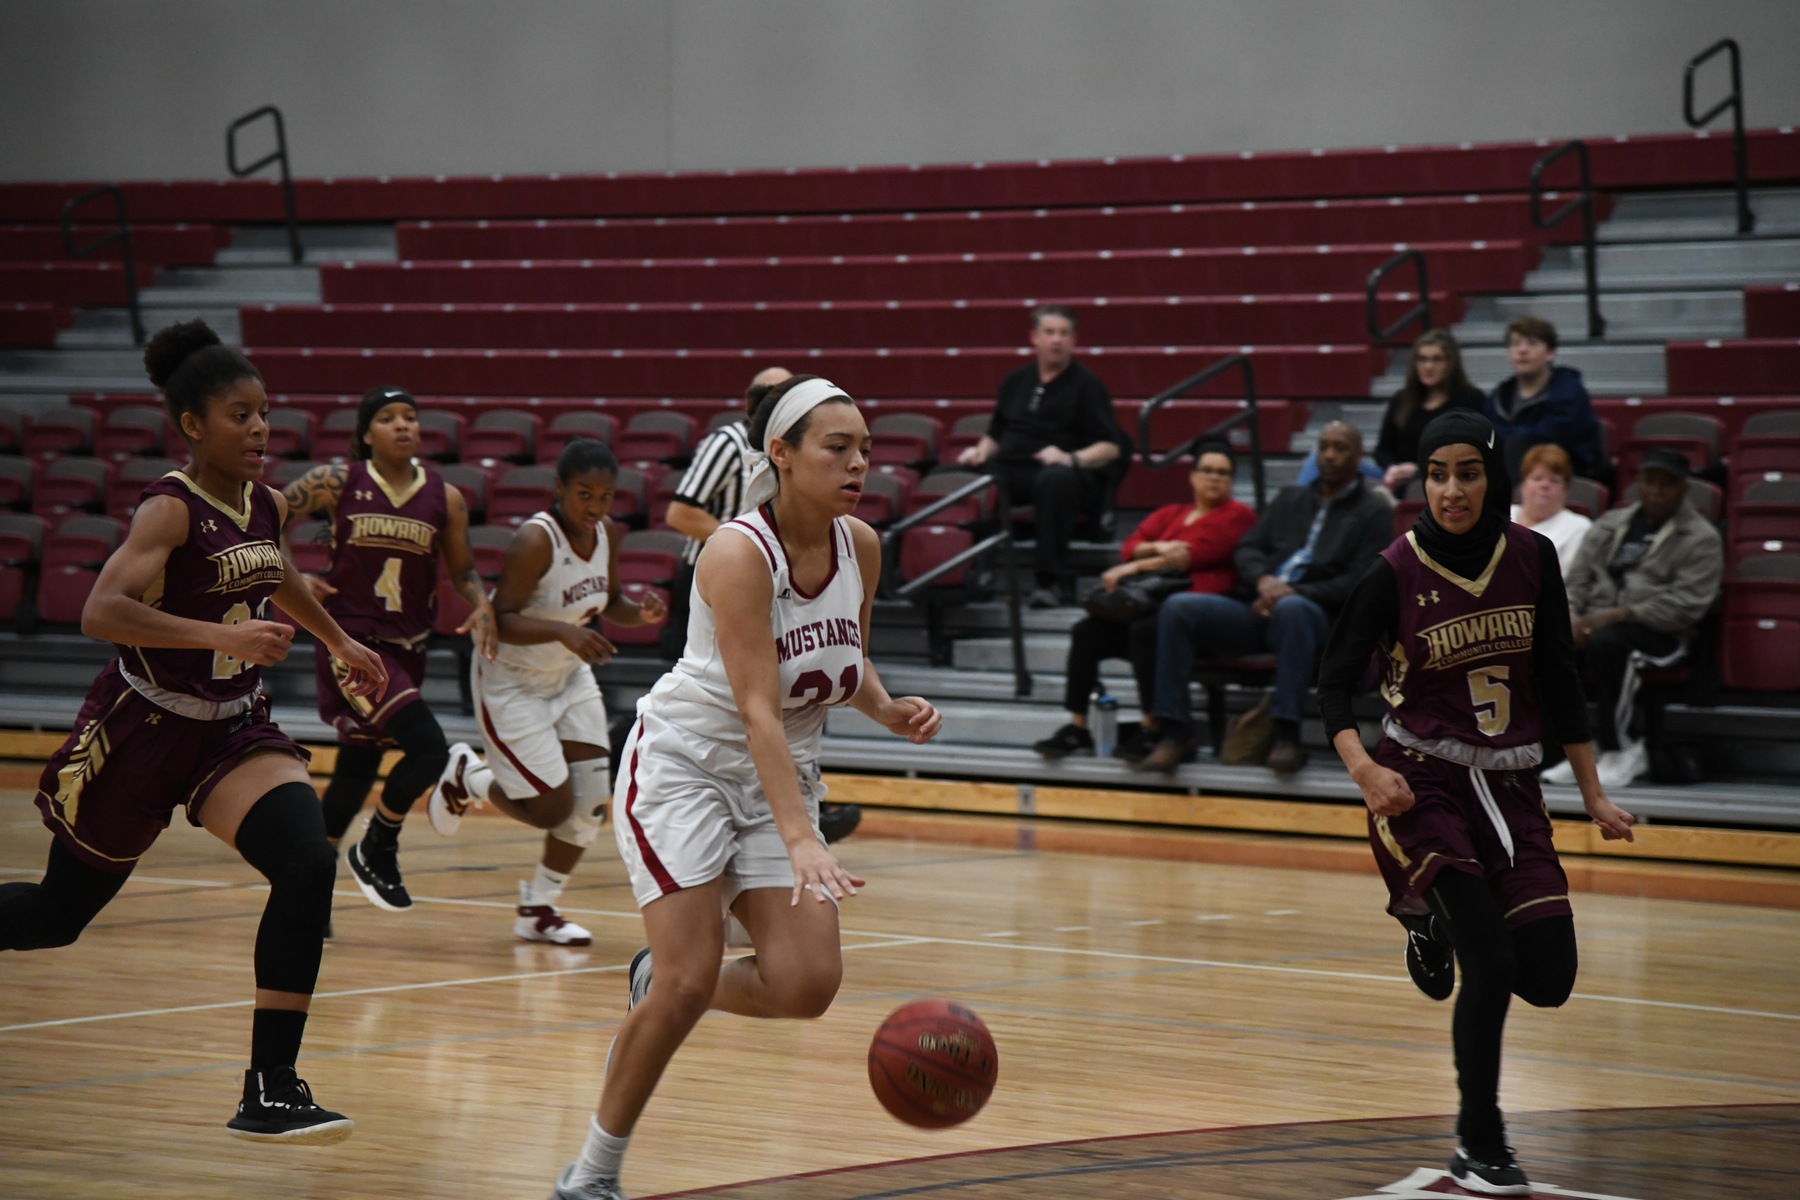 Women's Basketball Moves One Step Closer to Regional Playoffs Berth